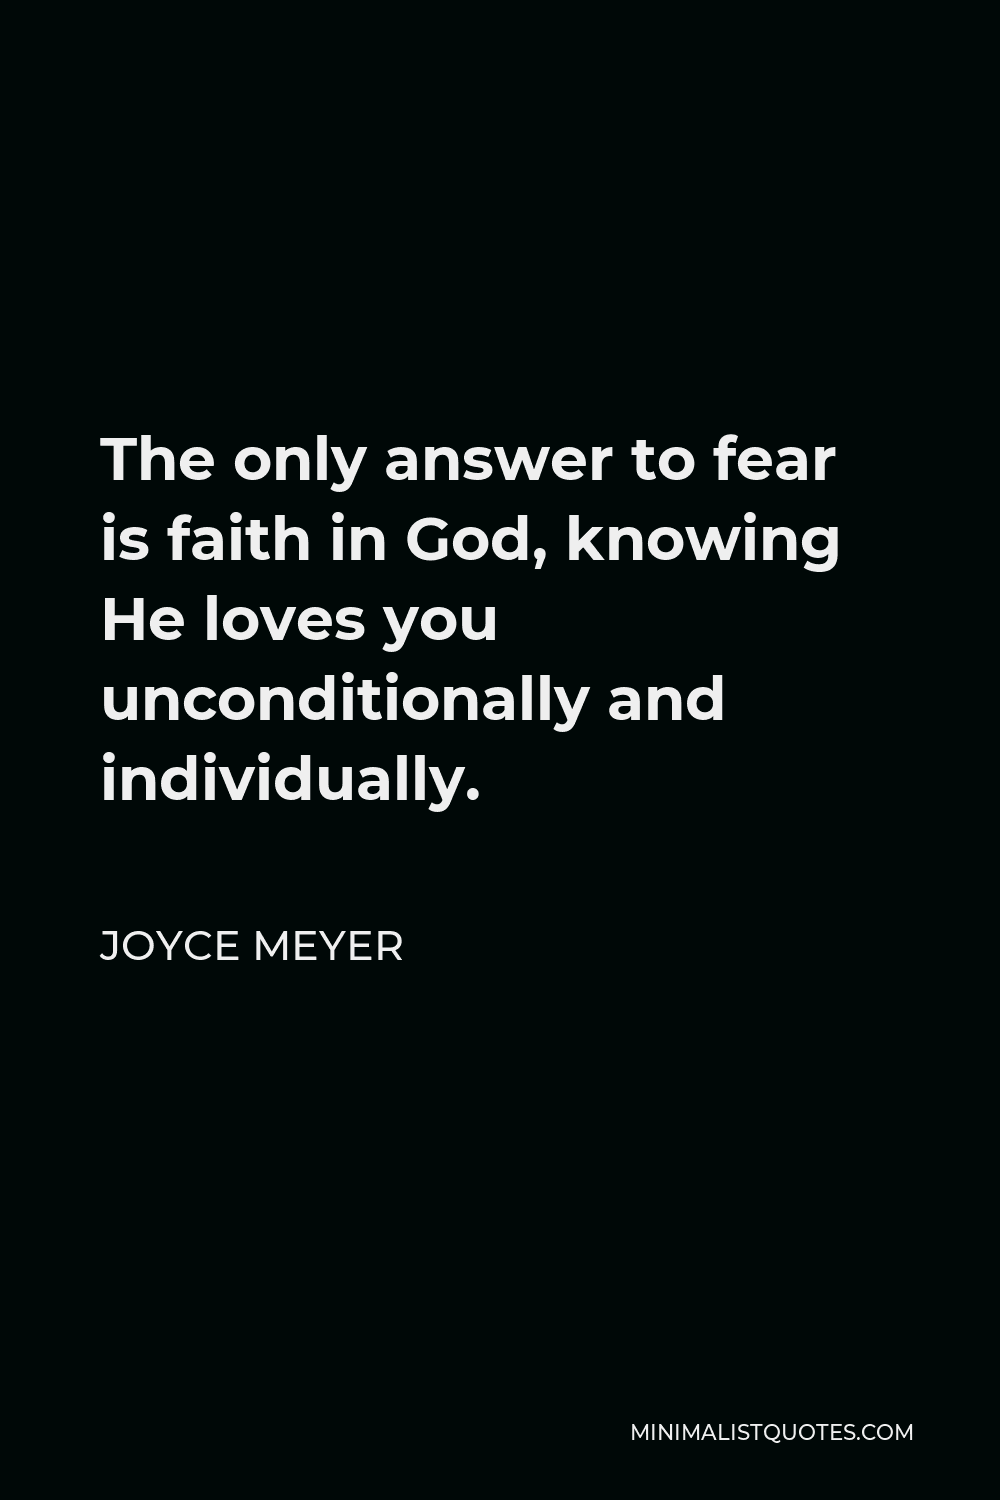 Joyce Meyer Quote - The only answer to fear is faith in God, knowing He loves you unconditionally and individually.